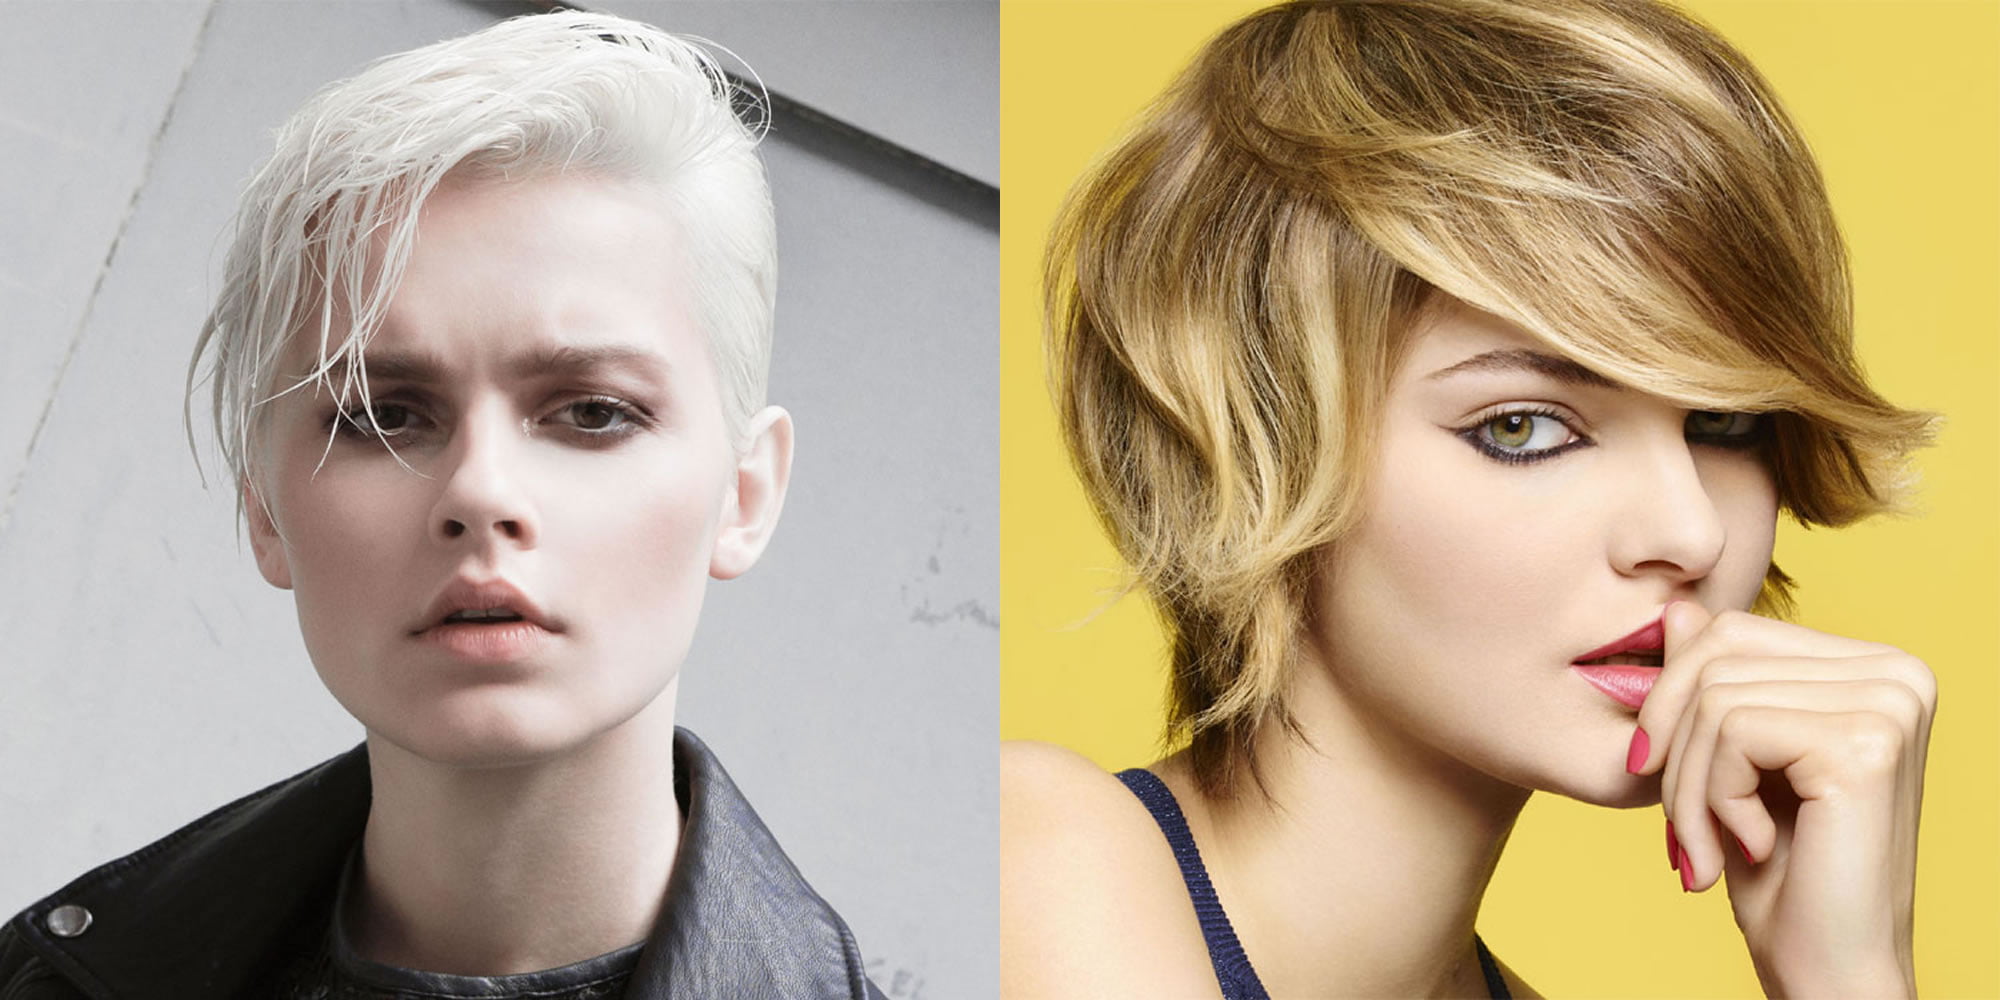 Hairstyles for Short Hair